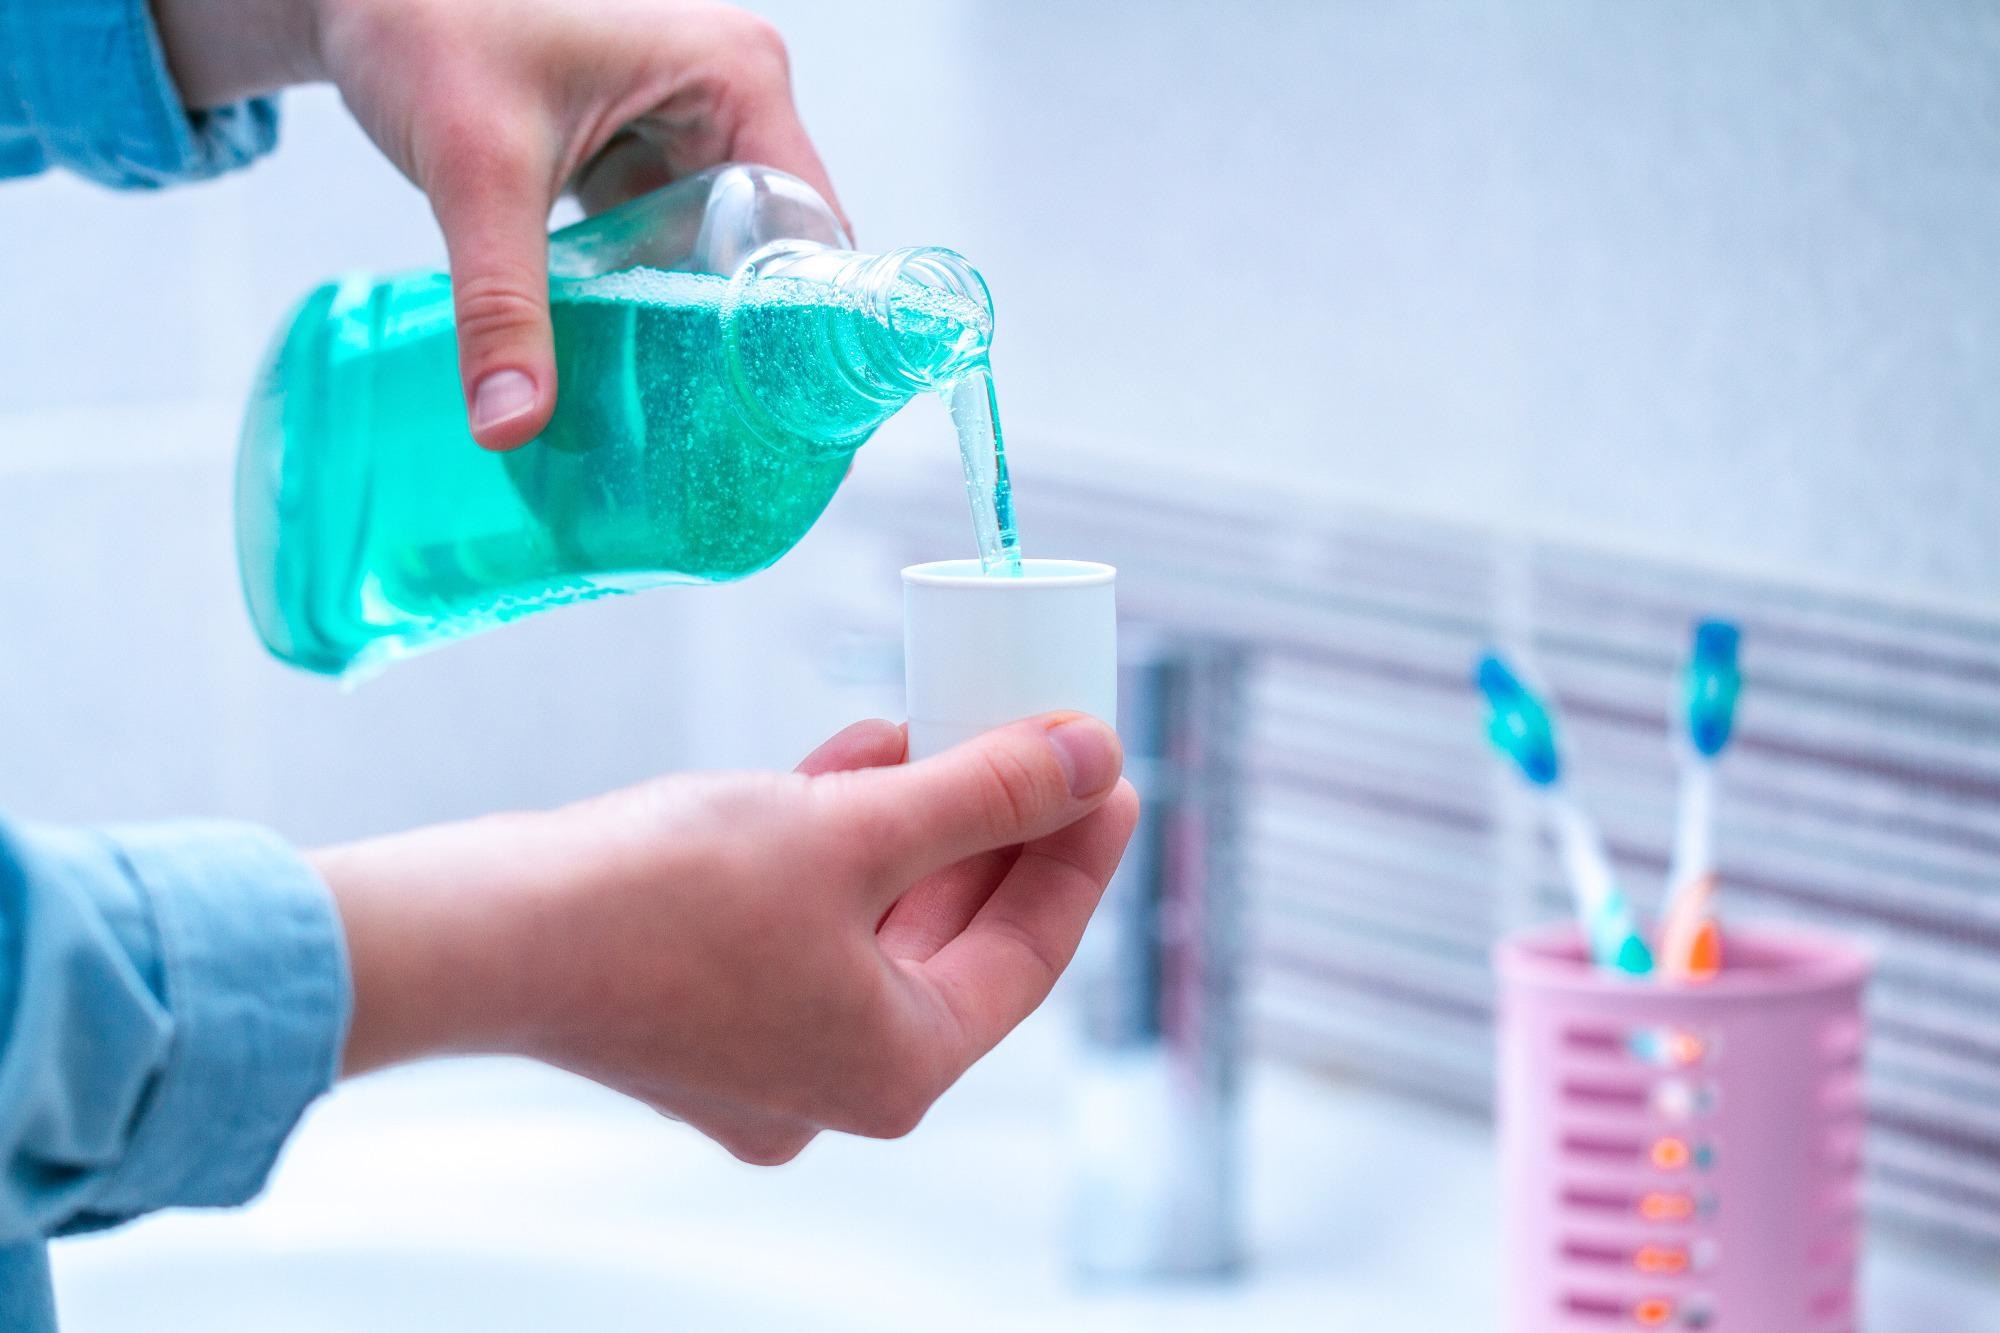 Study: Beneficial effects of a mouthwash containing an antiviral phthalocyanine derivative on the length of hospital stay for COVID-19: randomised trial. Image Credit: goffkein.pro / Shutterstock